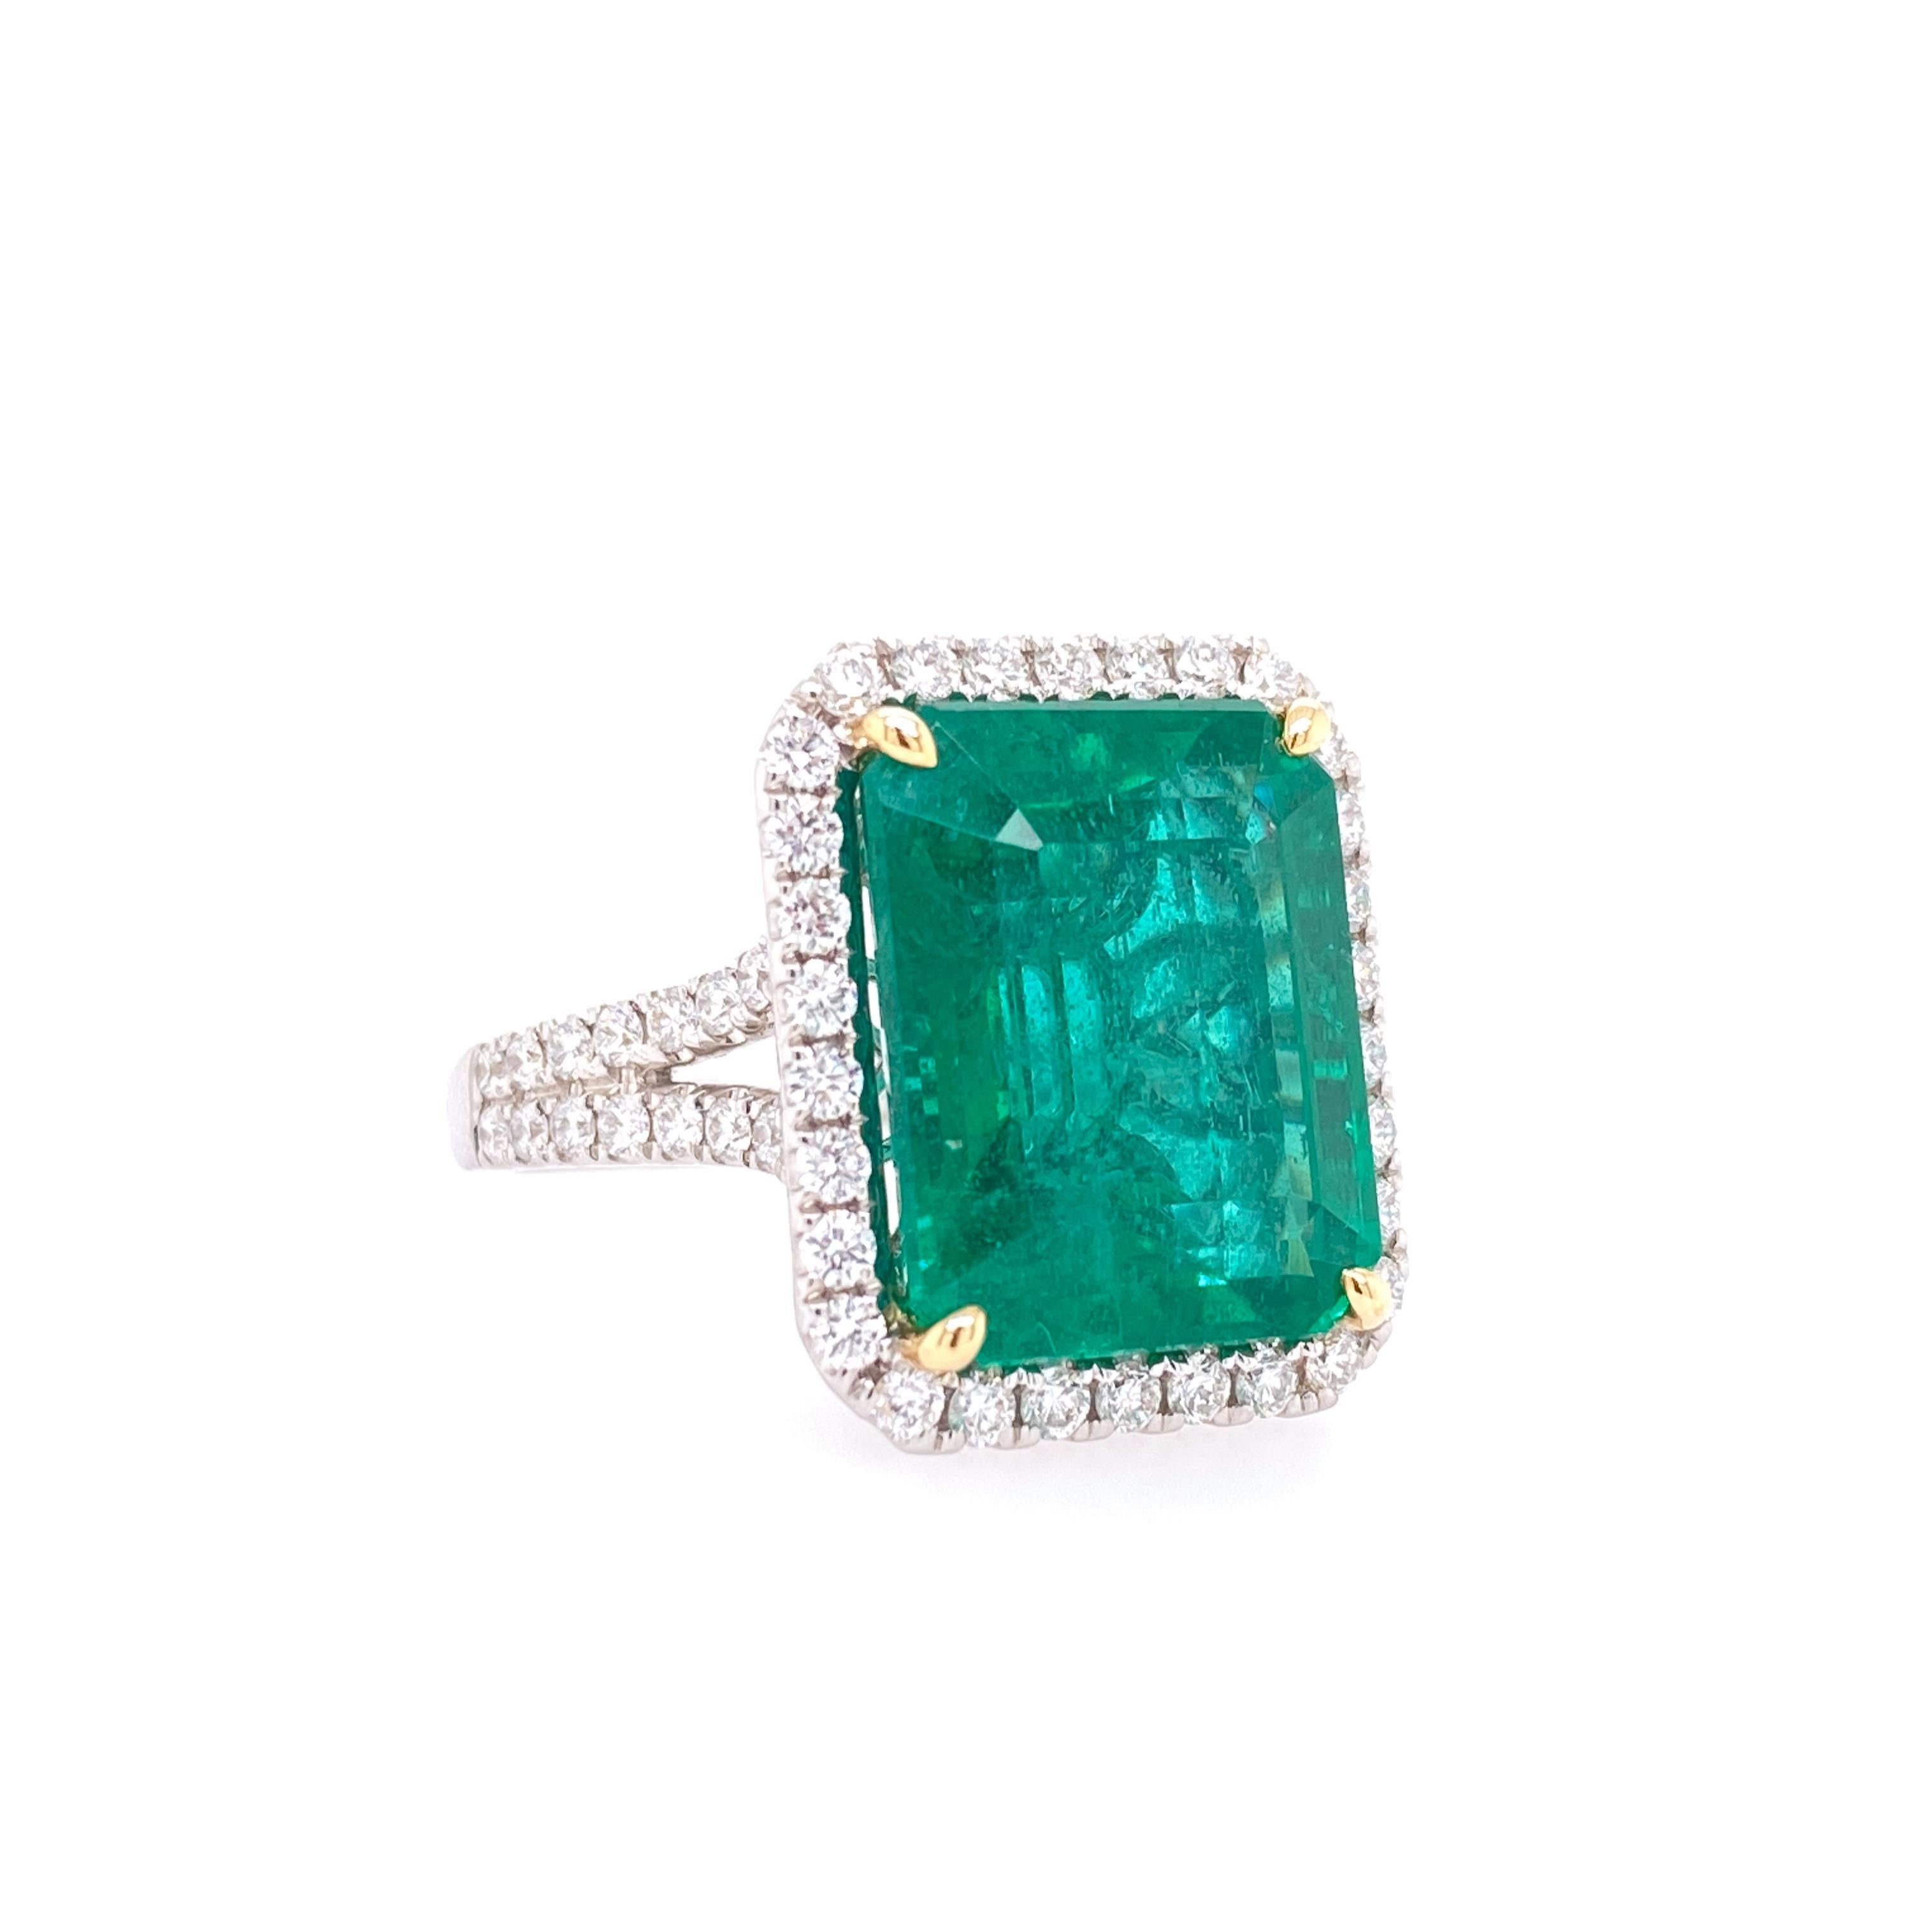 This stunning Cocktail Ring features a beautiful GIA Certified 12.25 Carat Emerald Cut African Emerald with a Diamond Halo, that sits on a Double Diamond Shank. This Ring is set in 18K White Gold, with 18K Yellow Gold prongs on the center